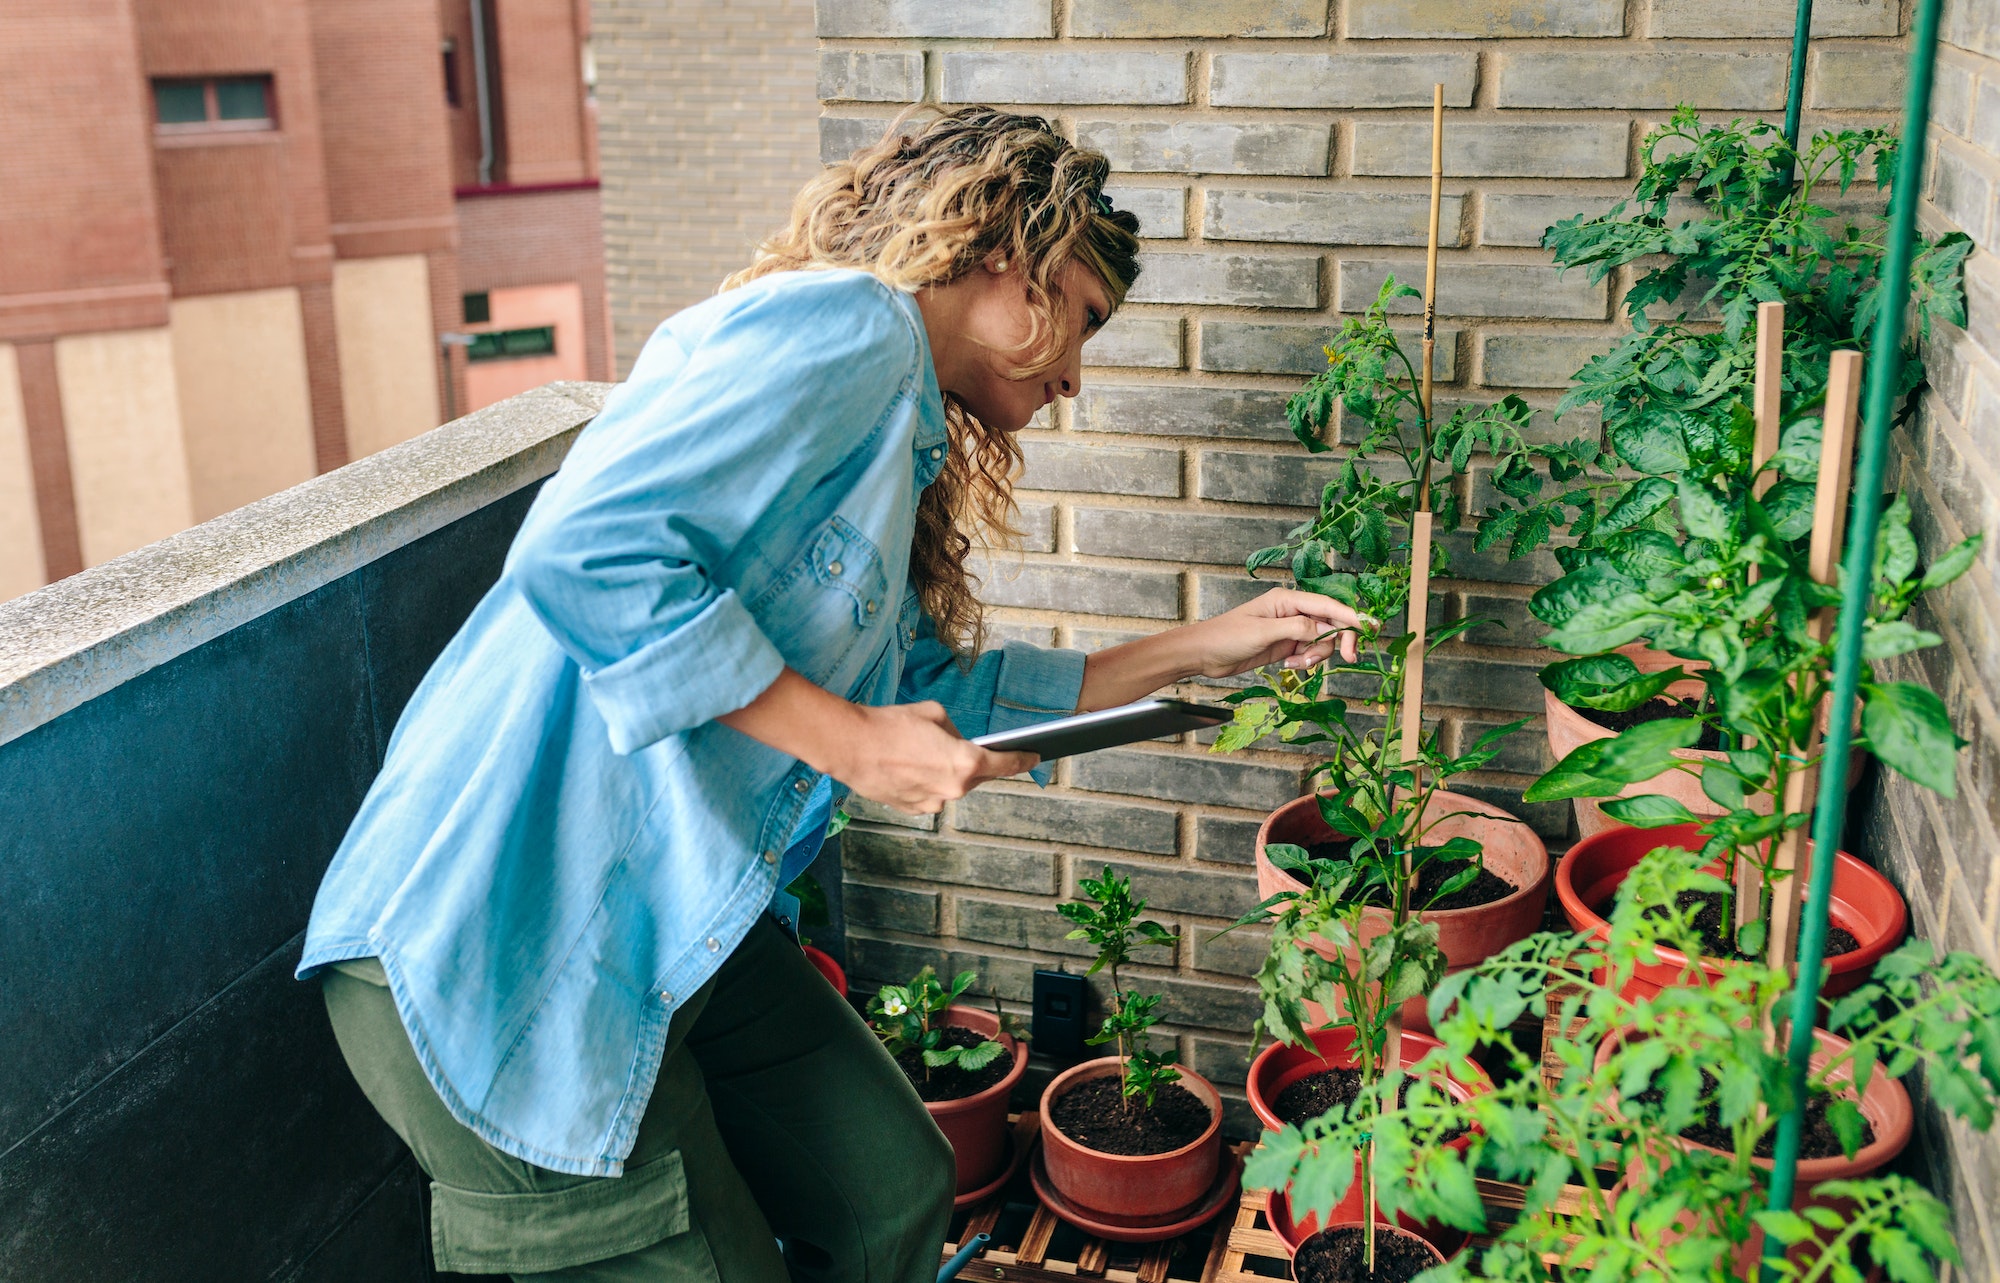 Woman checking plants of urban garden on terrace while holding digital tablet in hand